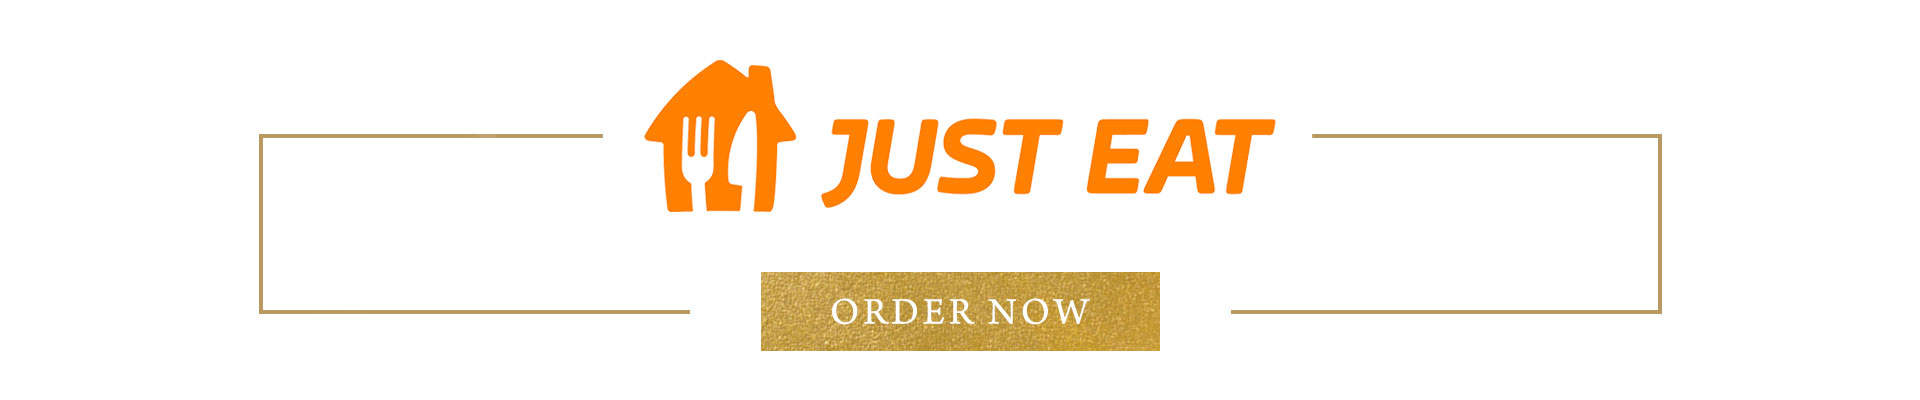 pcp-core-both-justeat-banner.jpg